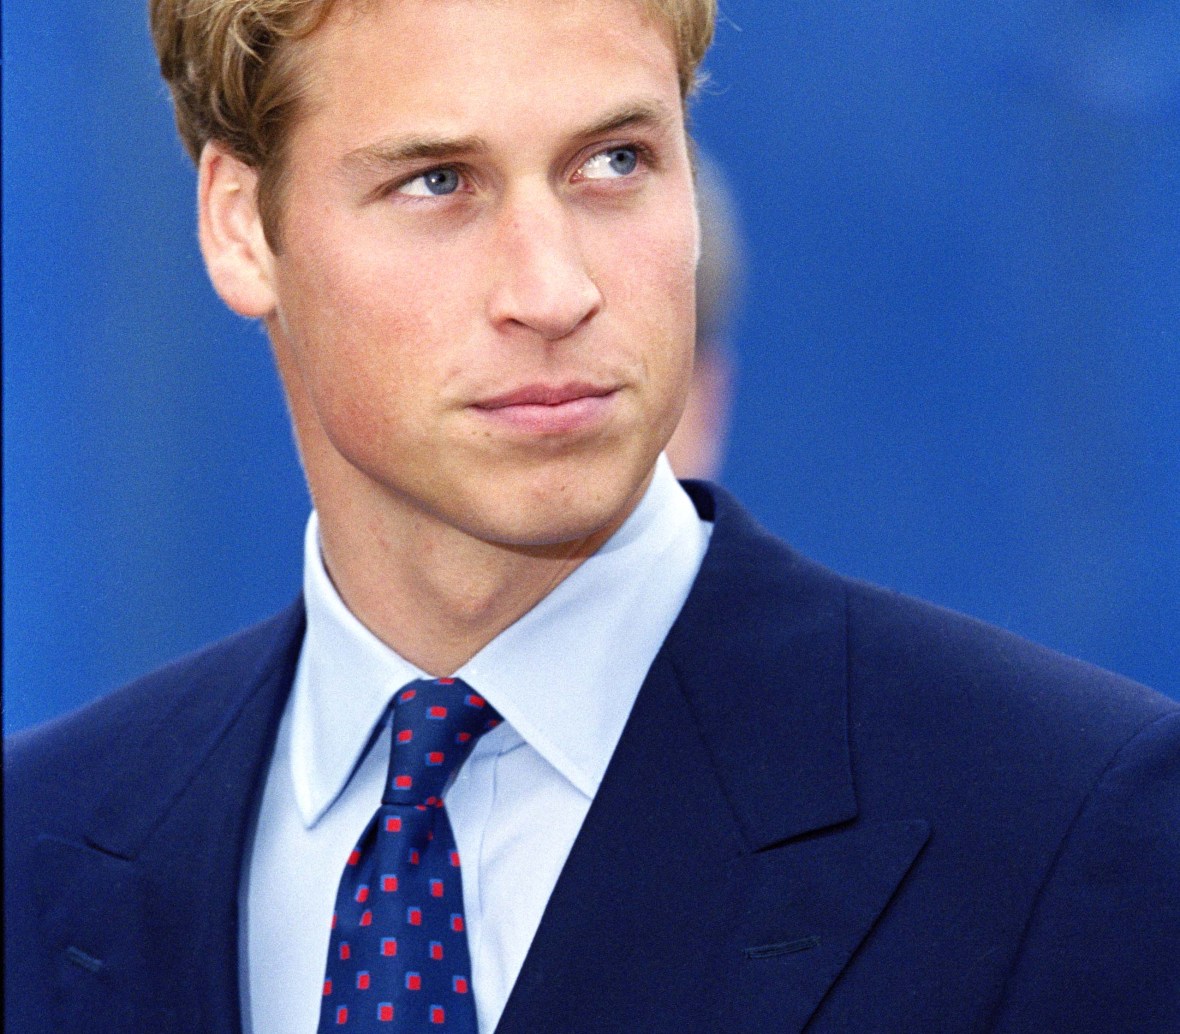 Prince William With Hair — Check out These Throwback Pics ...